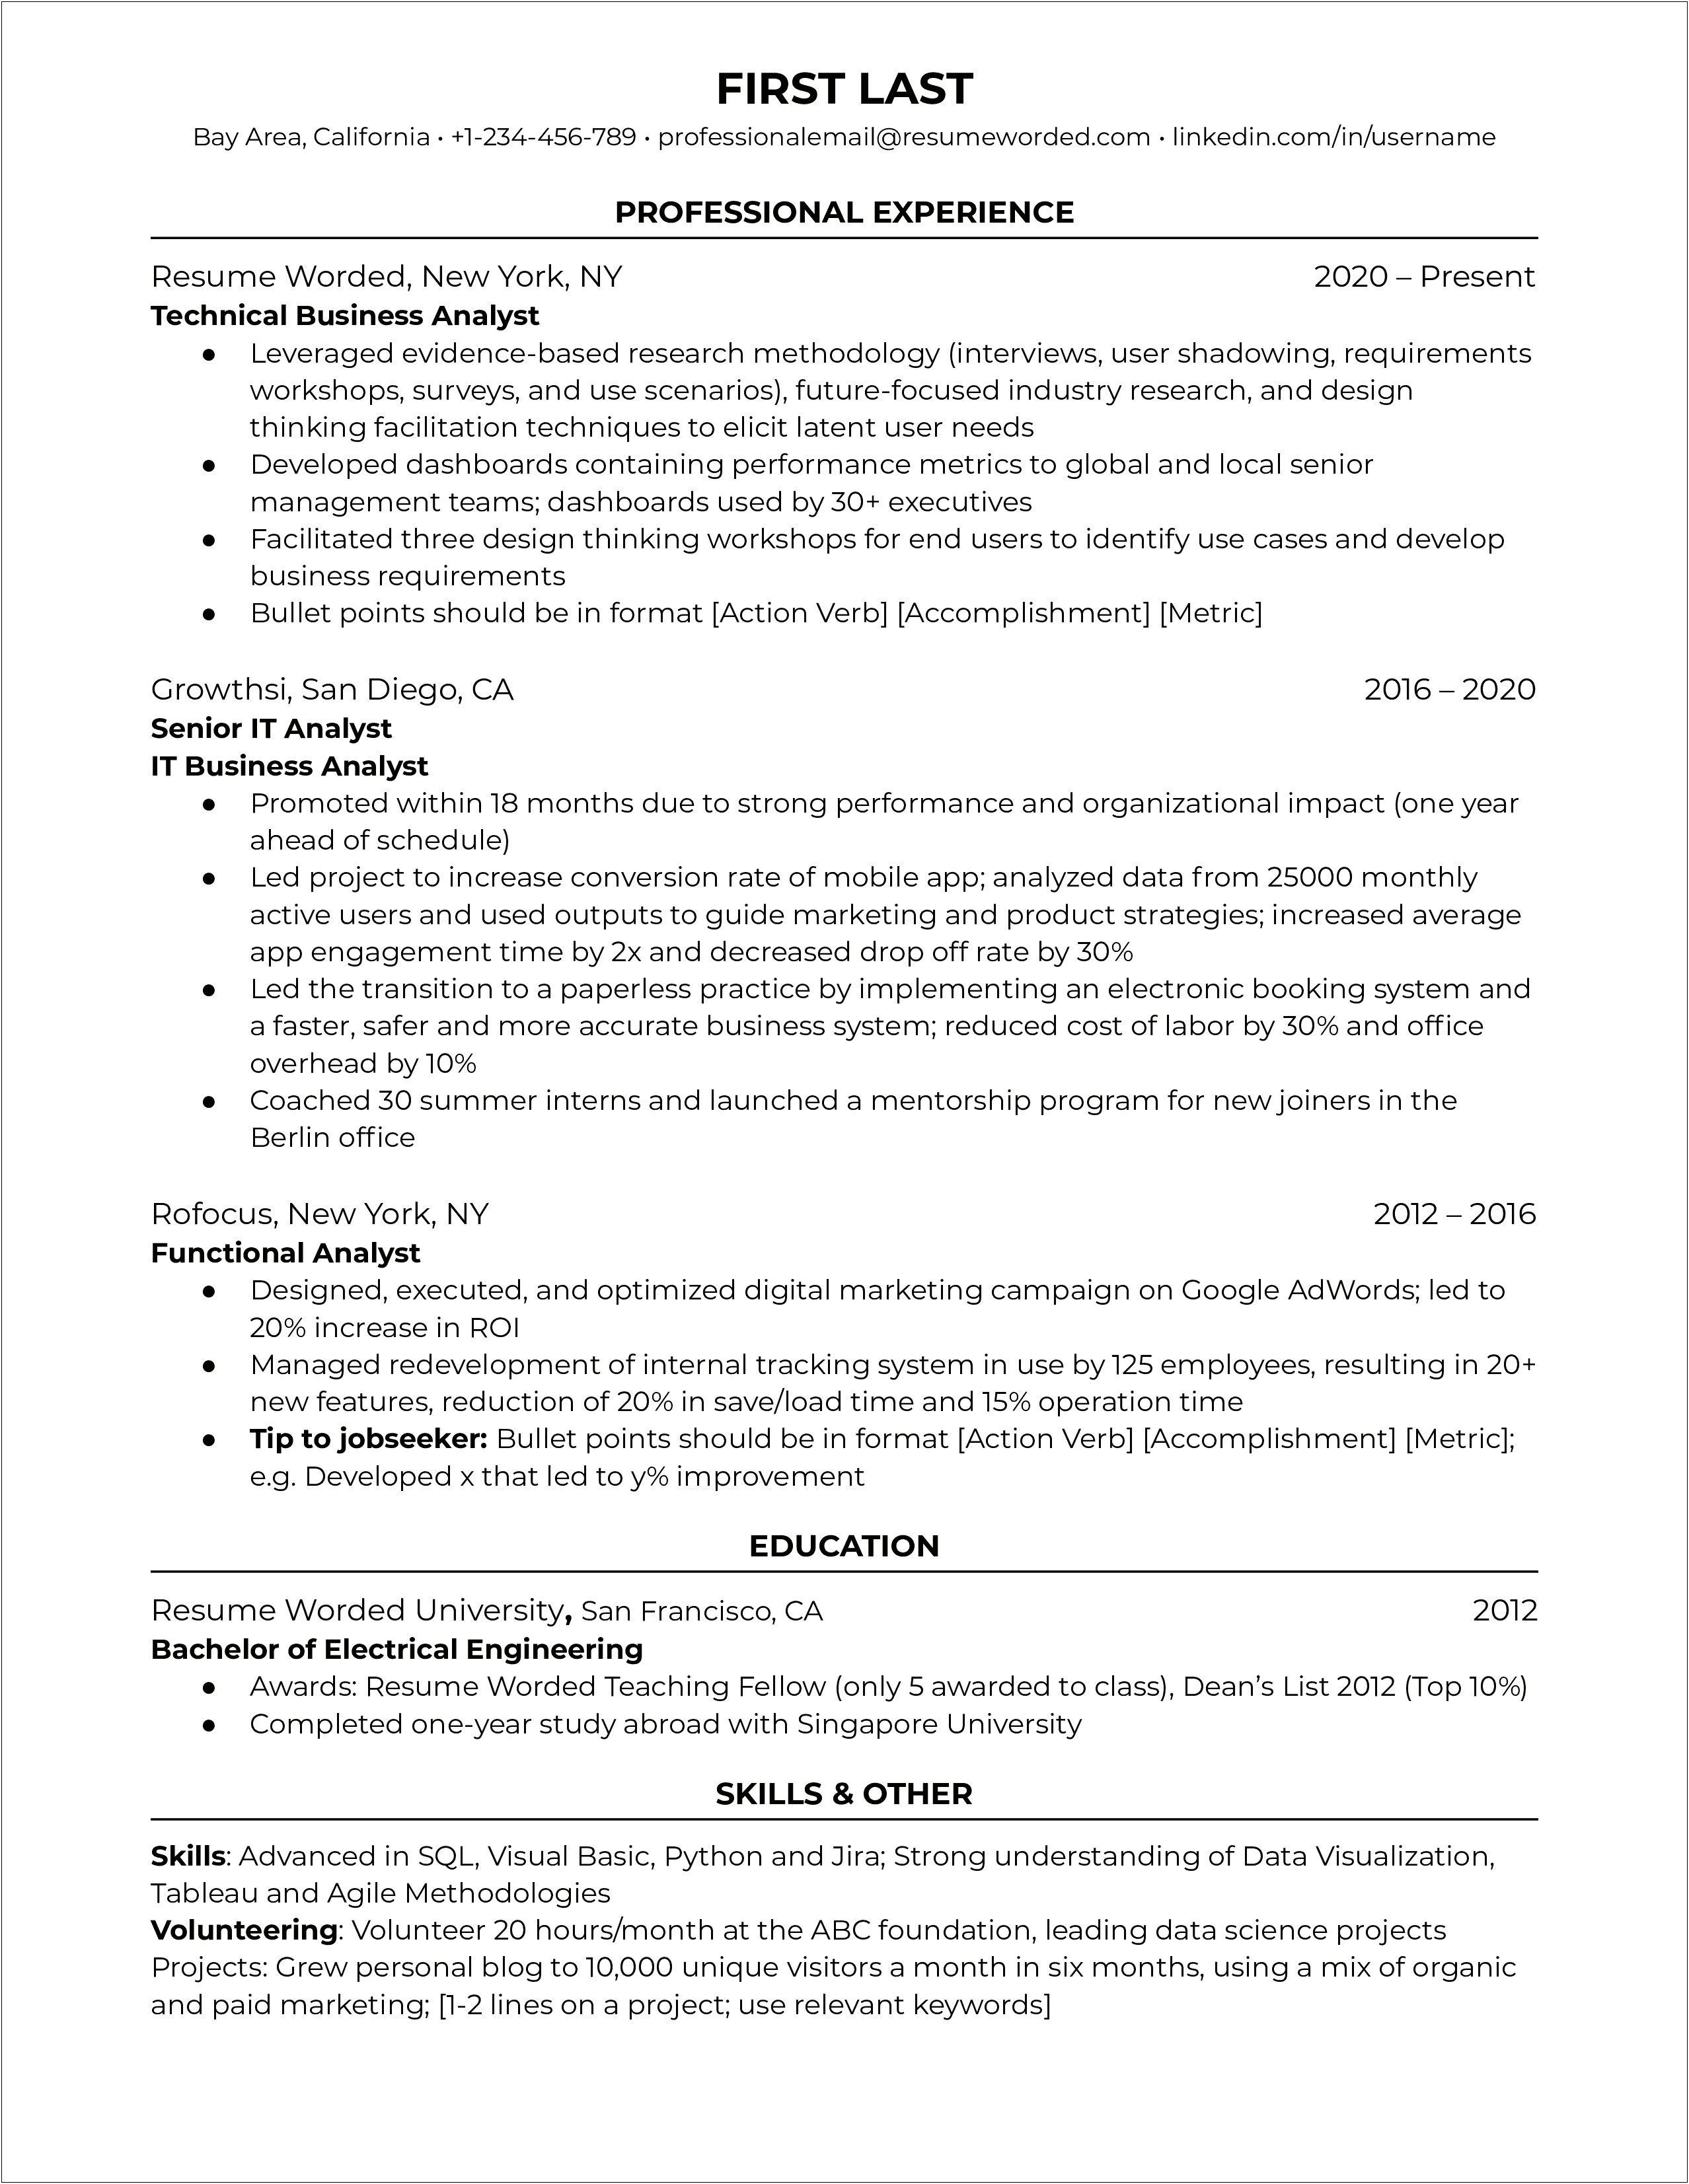 Sample Resume For Agile Business Analyst